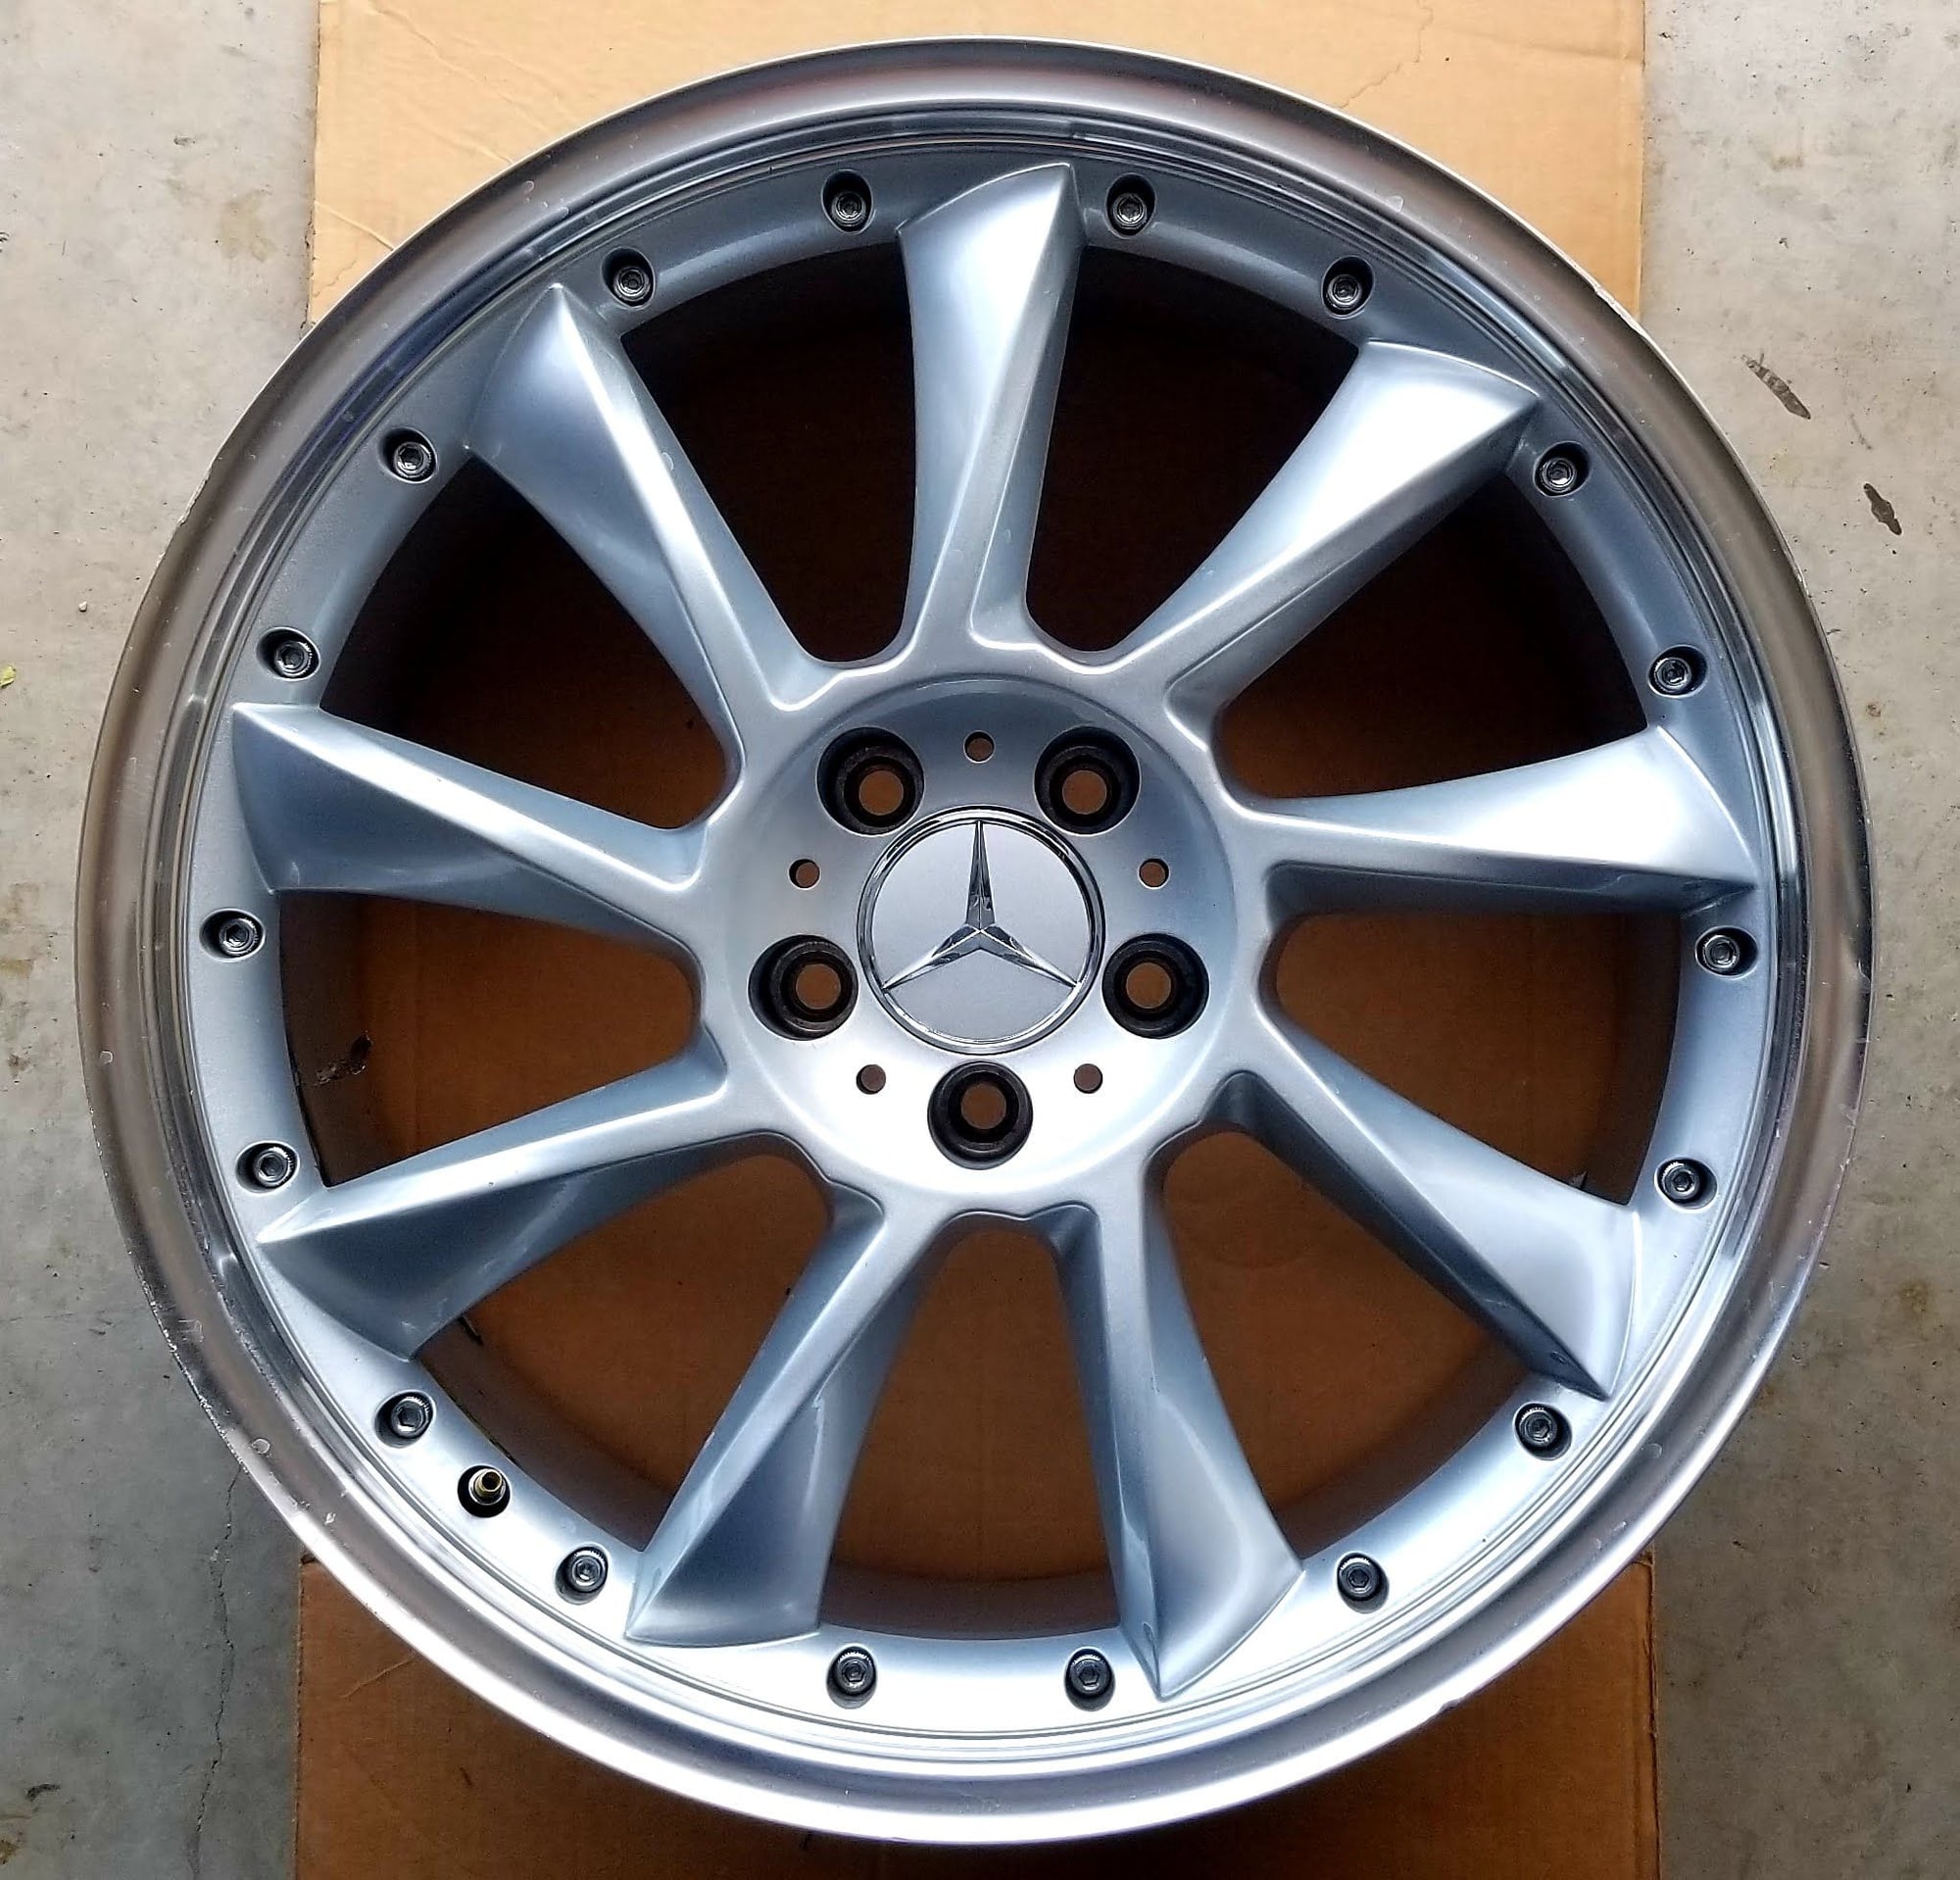 Wheels and Tires/Axles - 19" Staggered Replica SLR Mercedes Wheels Hollander 65344, 65345 LORINSER Style - Used - Dallas, TX 75040, United States